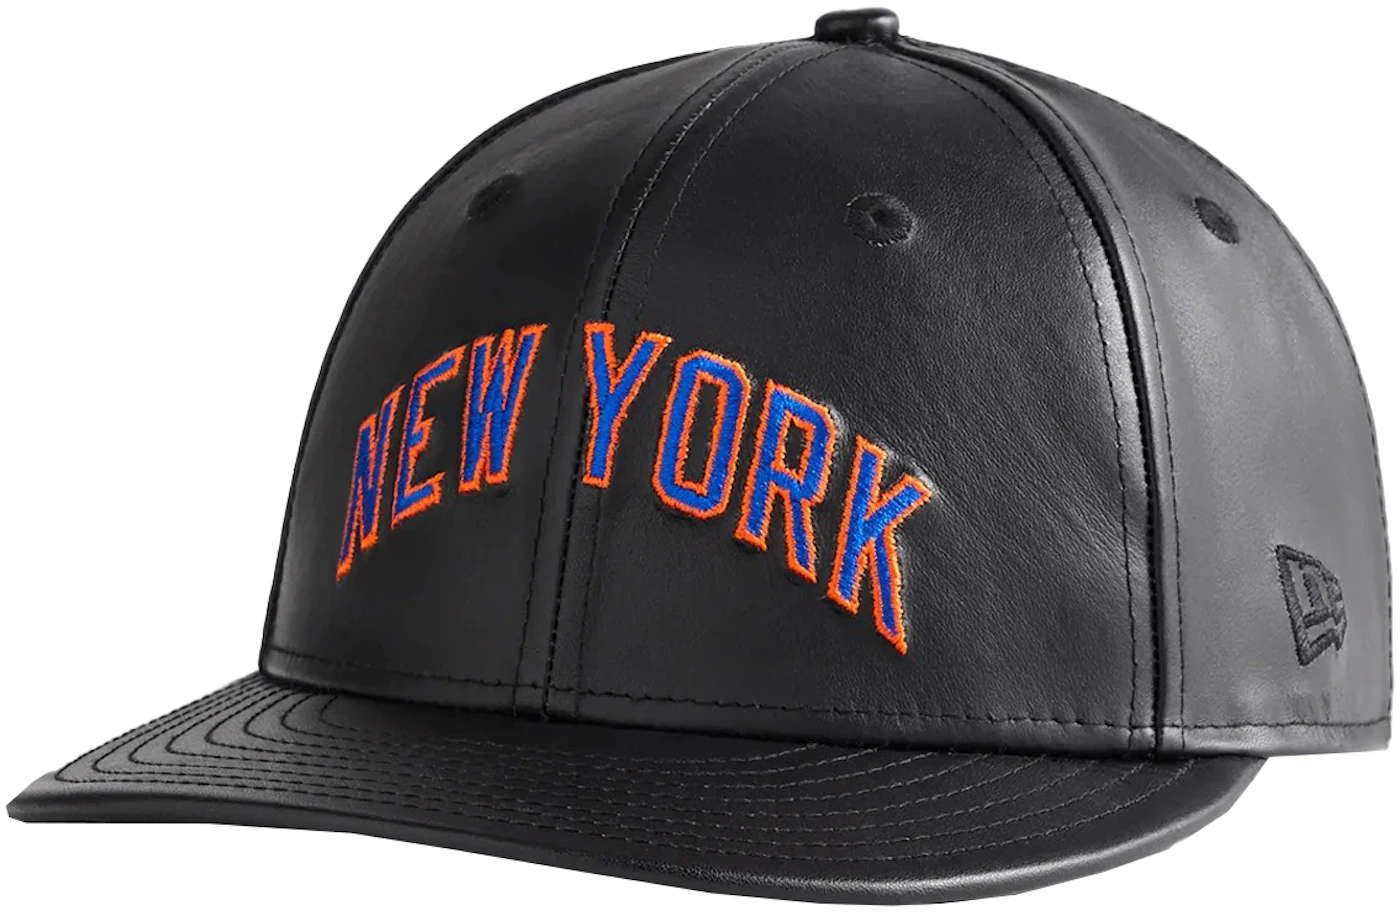 New Era New York Knicks P.U Fitted Hat NBA Official Team Black Faux Leather  Cap